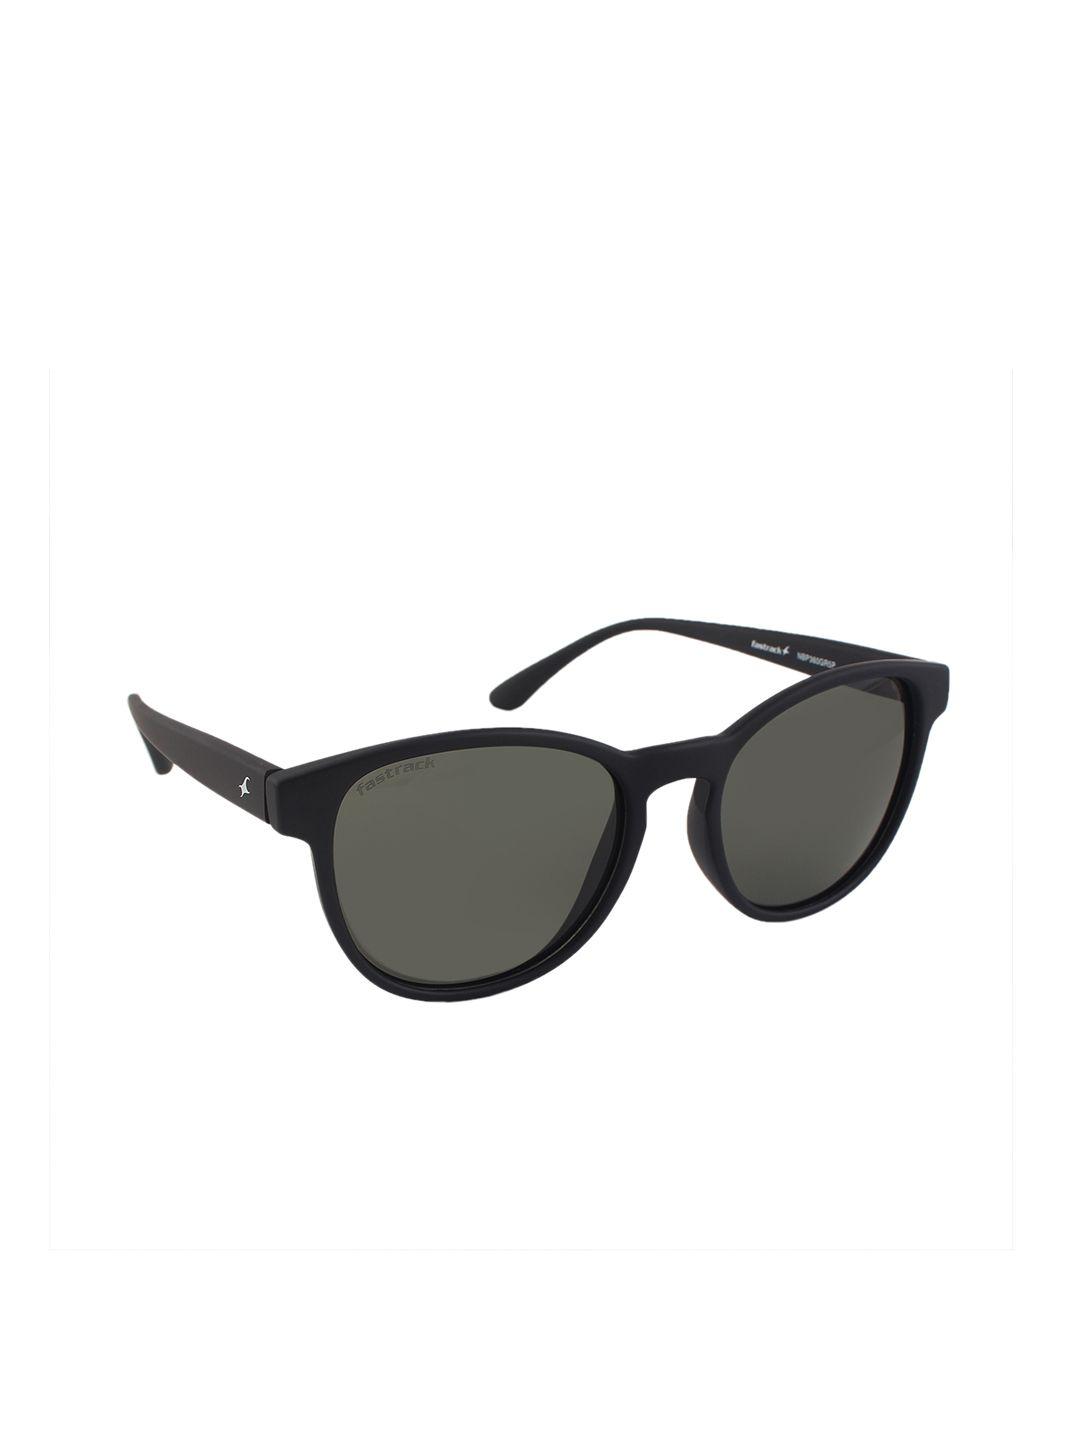 fastrack-men-oval-polarised-and-uv-protected-sunglasses-p360gr5p